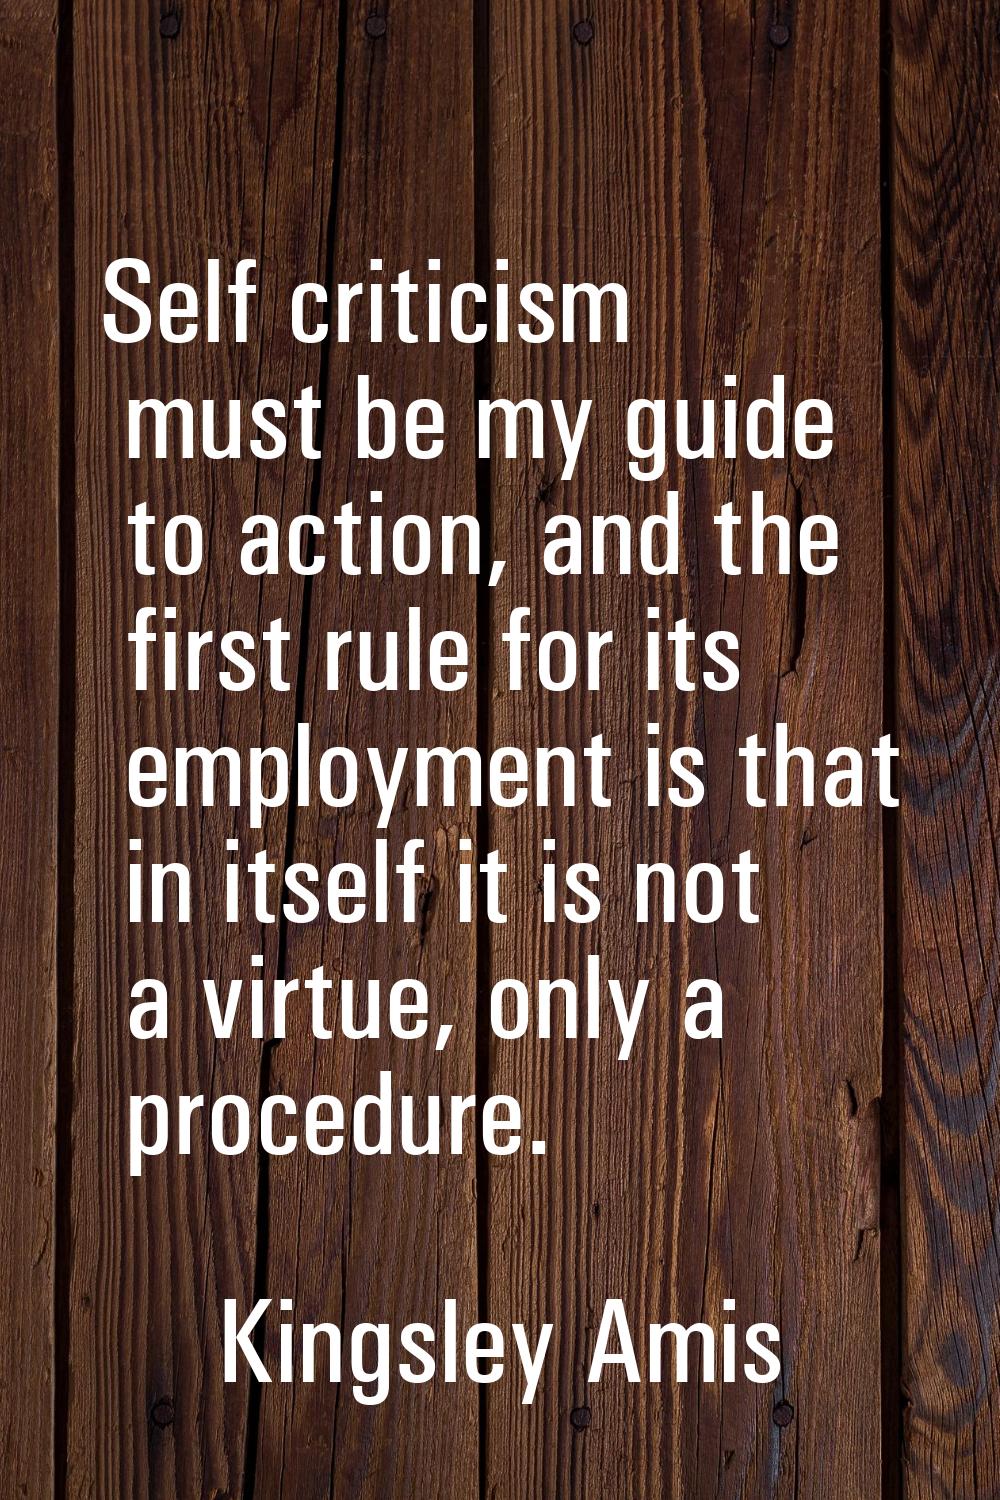 Self criticism must be my guide to action, and the first rule for its employment is that in itself 